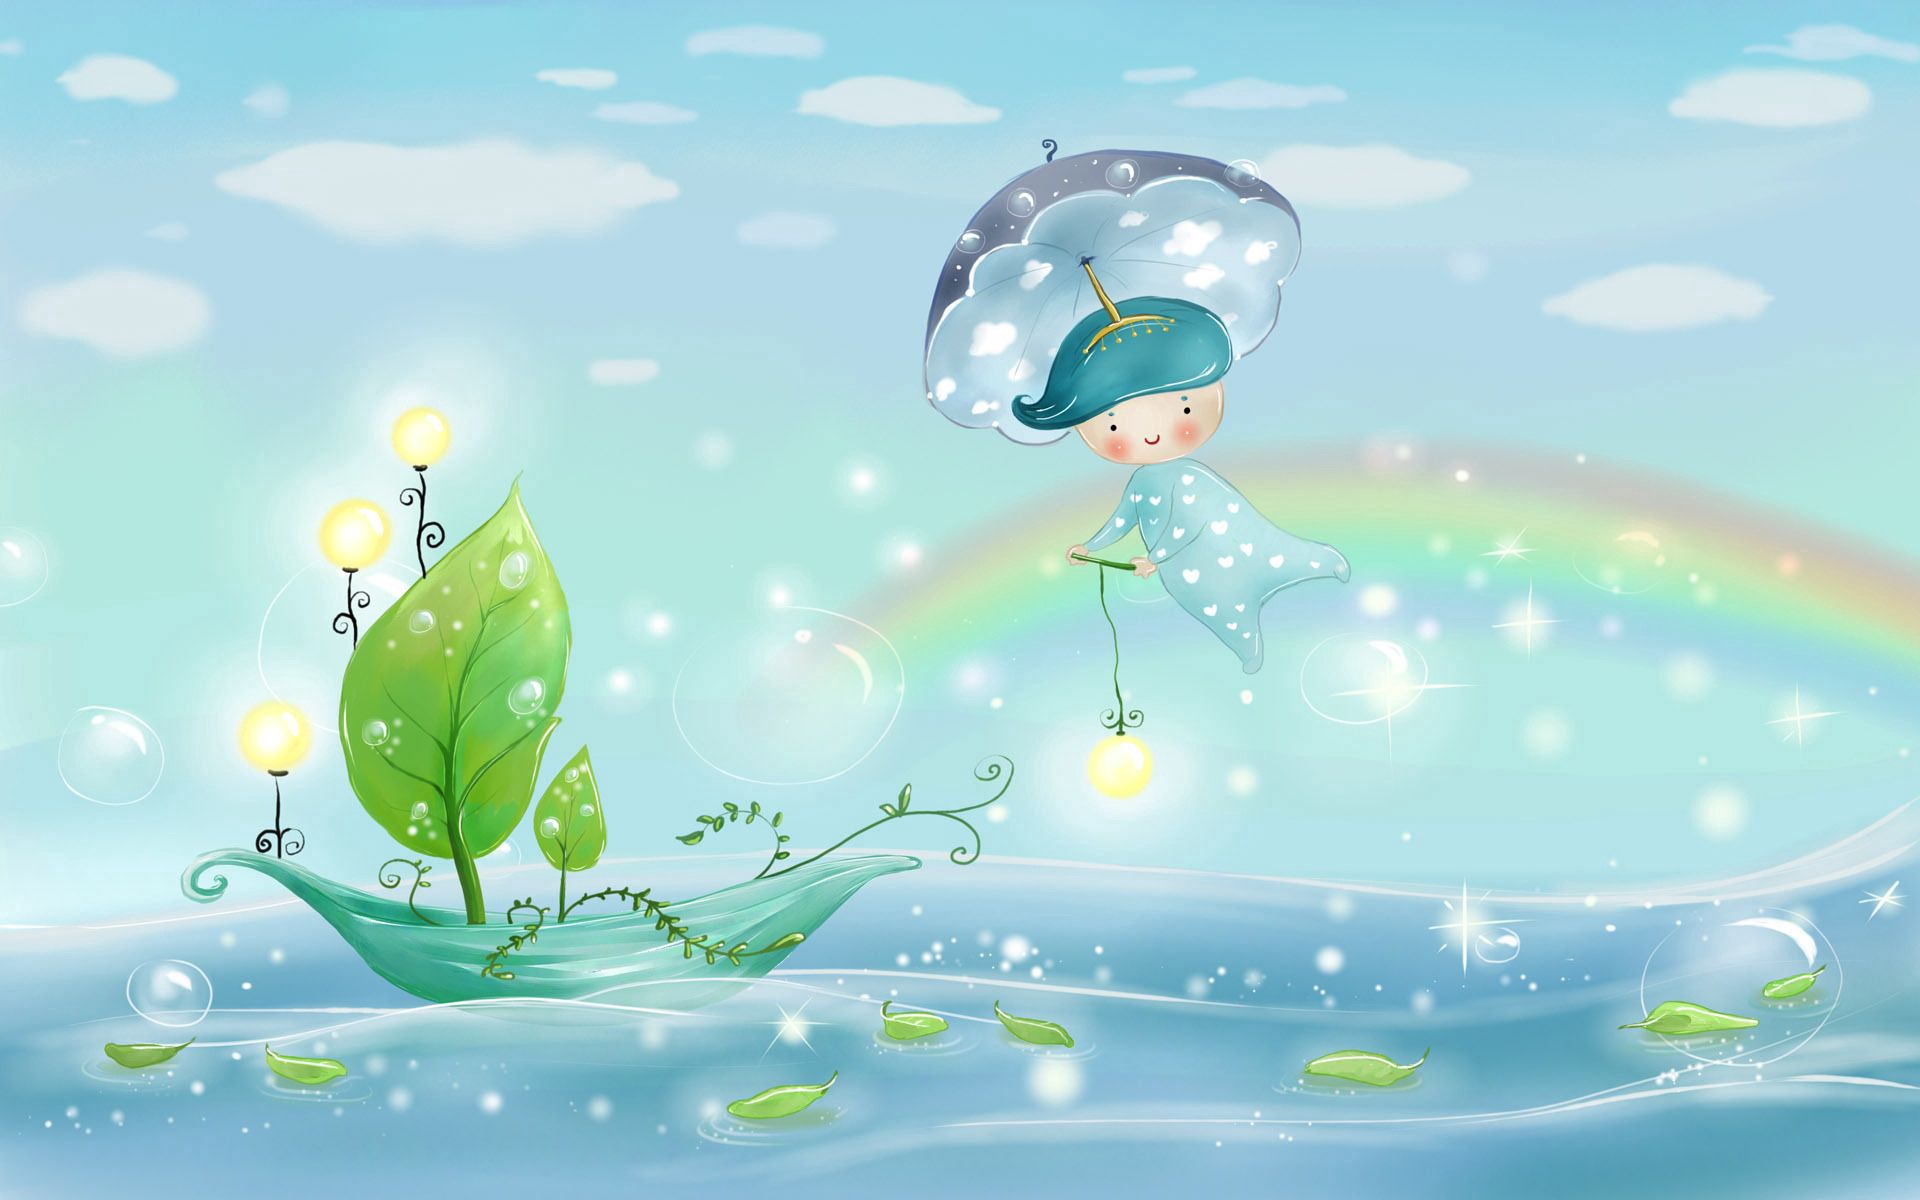 picture, vector, boat, lanterns, nature, water, sky, leaves, rain, sea, bubbles, clouds, rainbow, lights, shine, light, drawing, sail, umbrella, boy, weather High Definition image